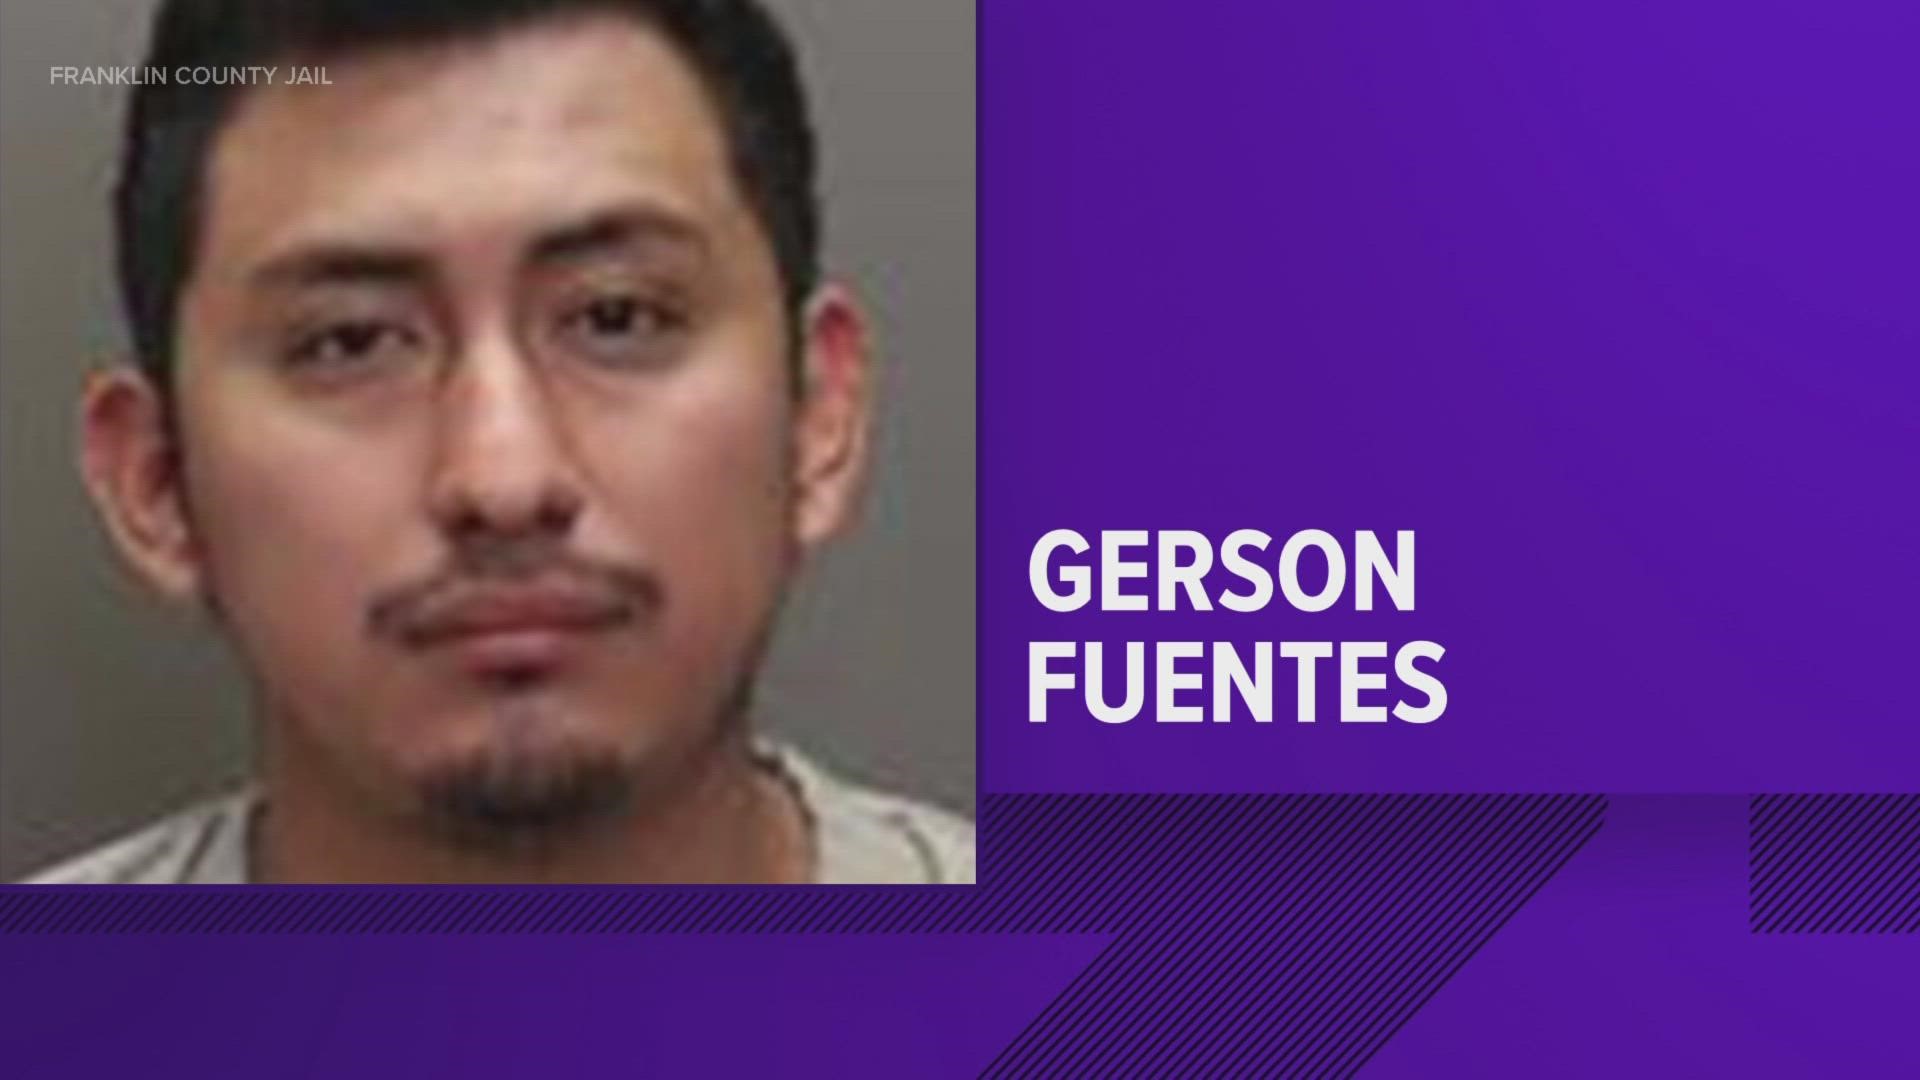 Gerson Fuentes, 27, has been charged with one count of rape. He was given a $2 million bond.